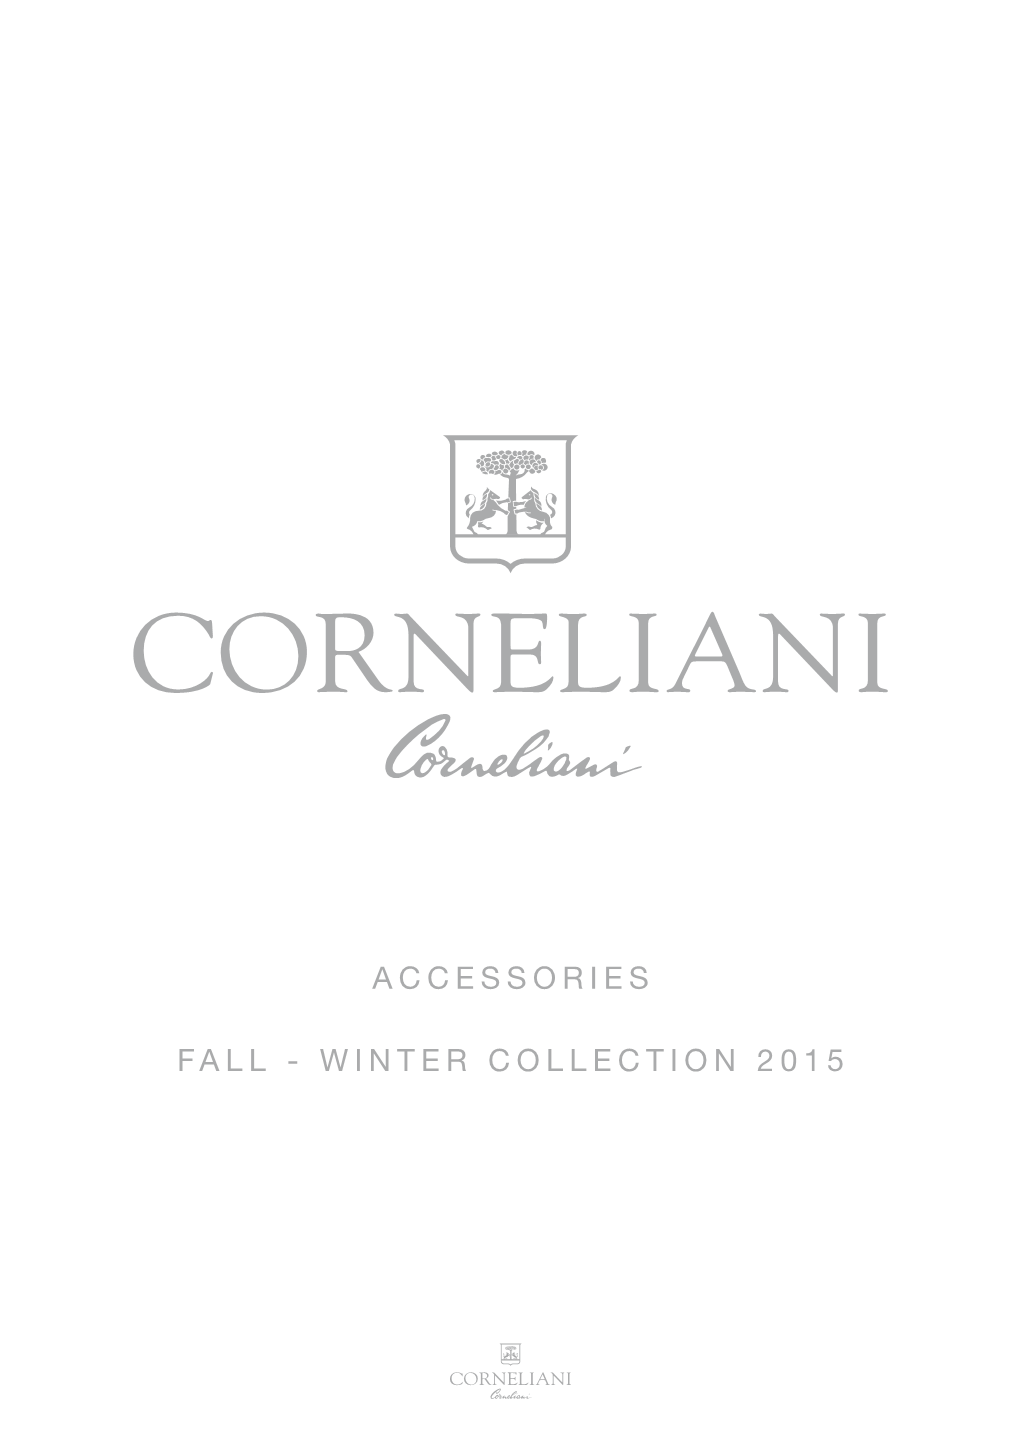 Winter Collection 2015 Accessories